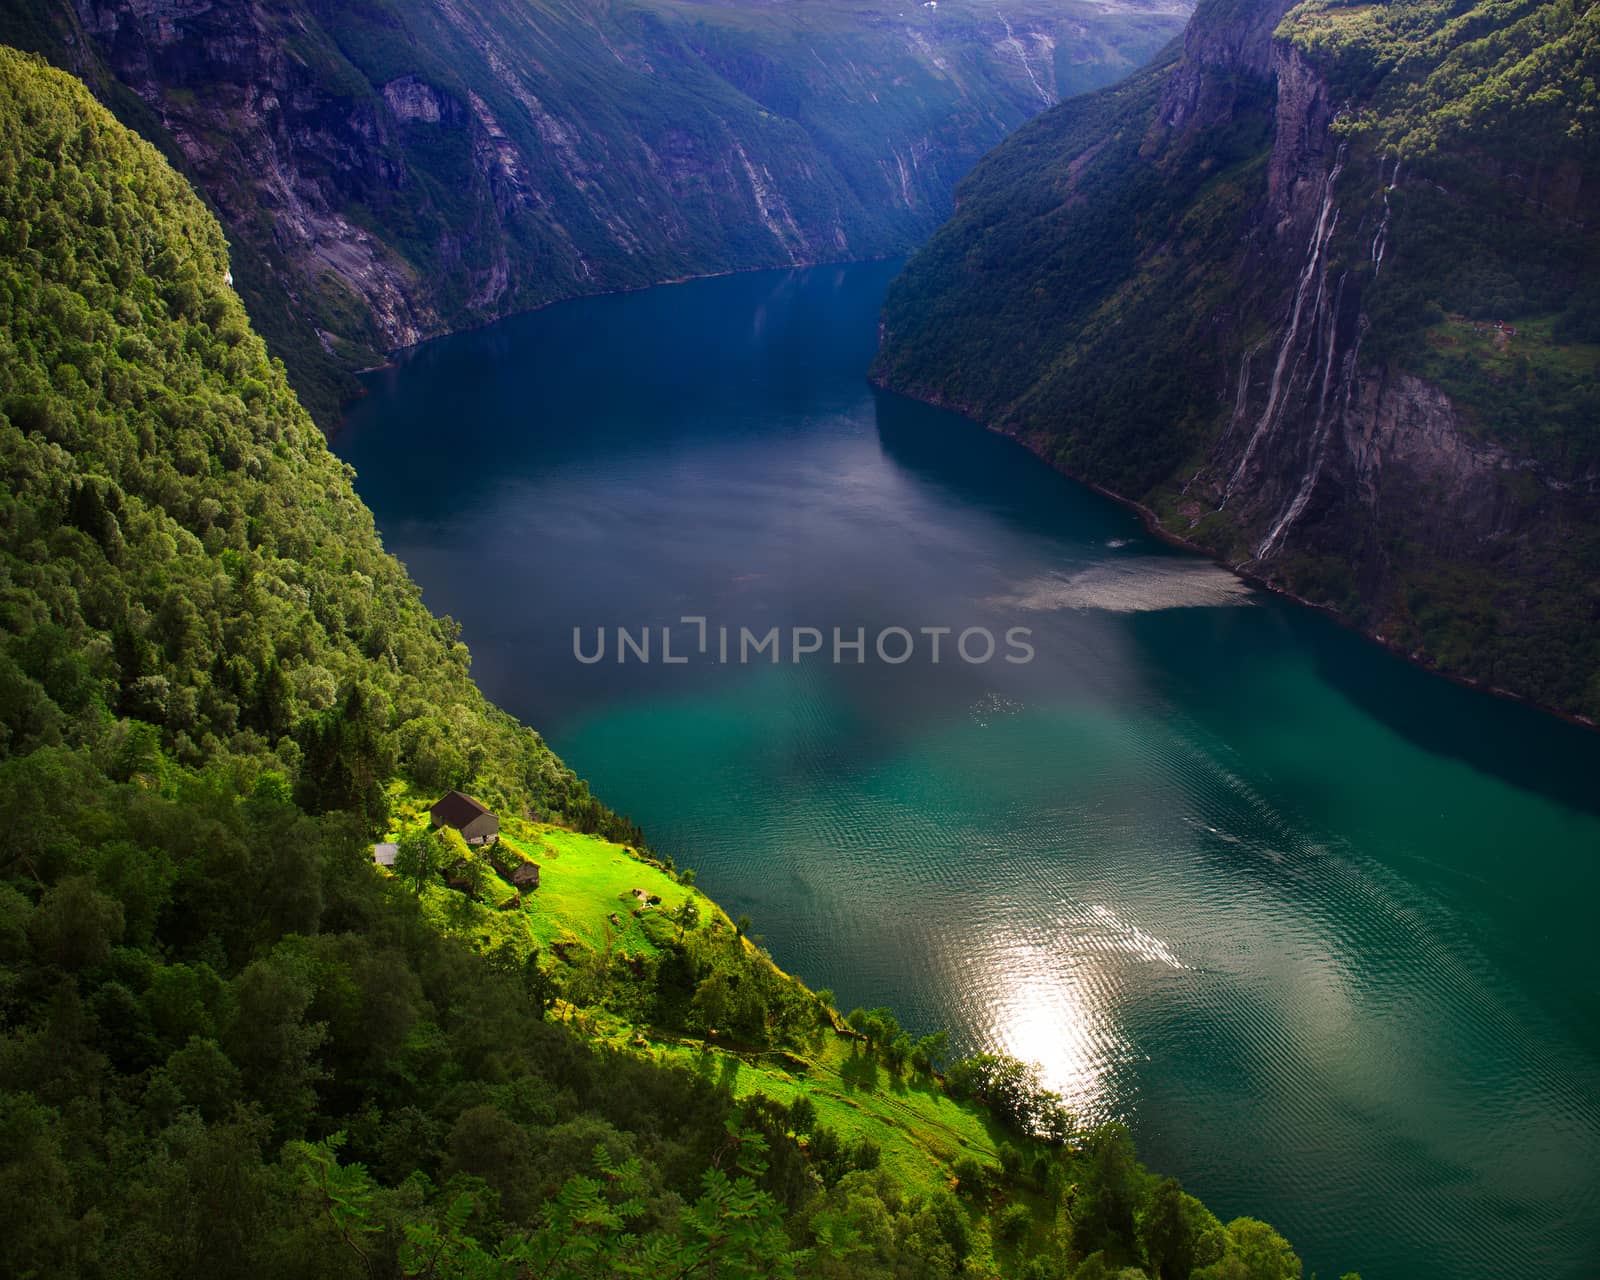 The farm is a hiking destination in the Geiranger fjord.